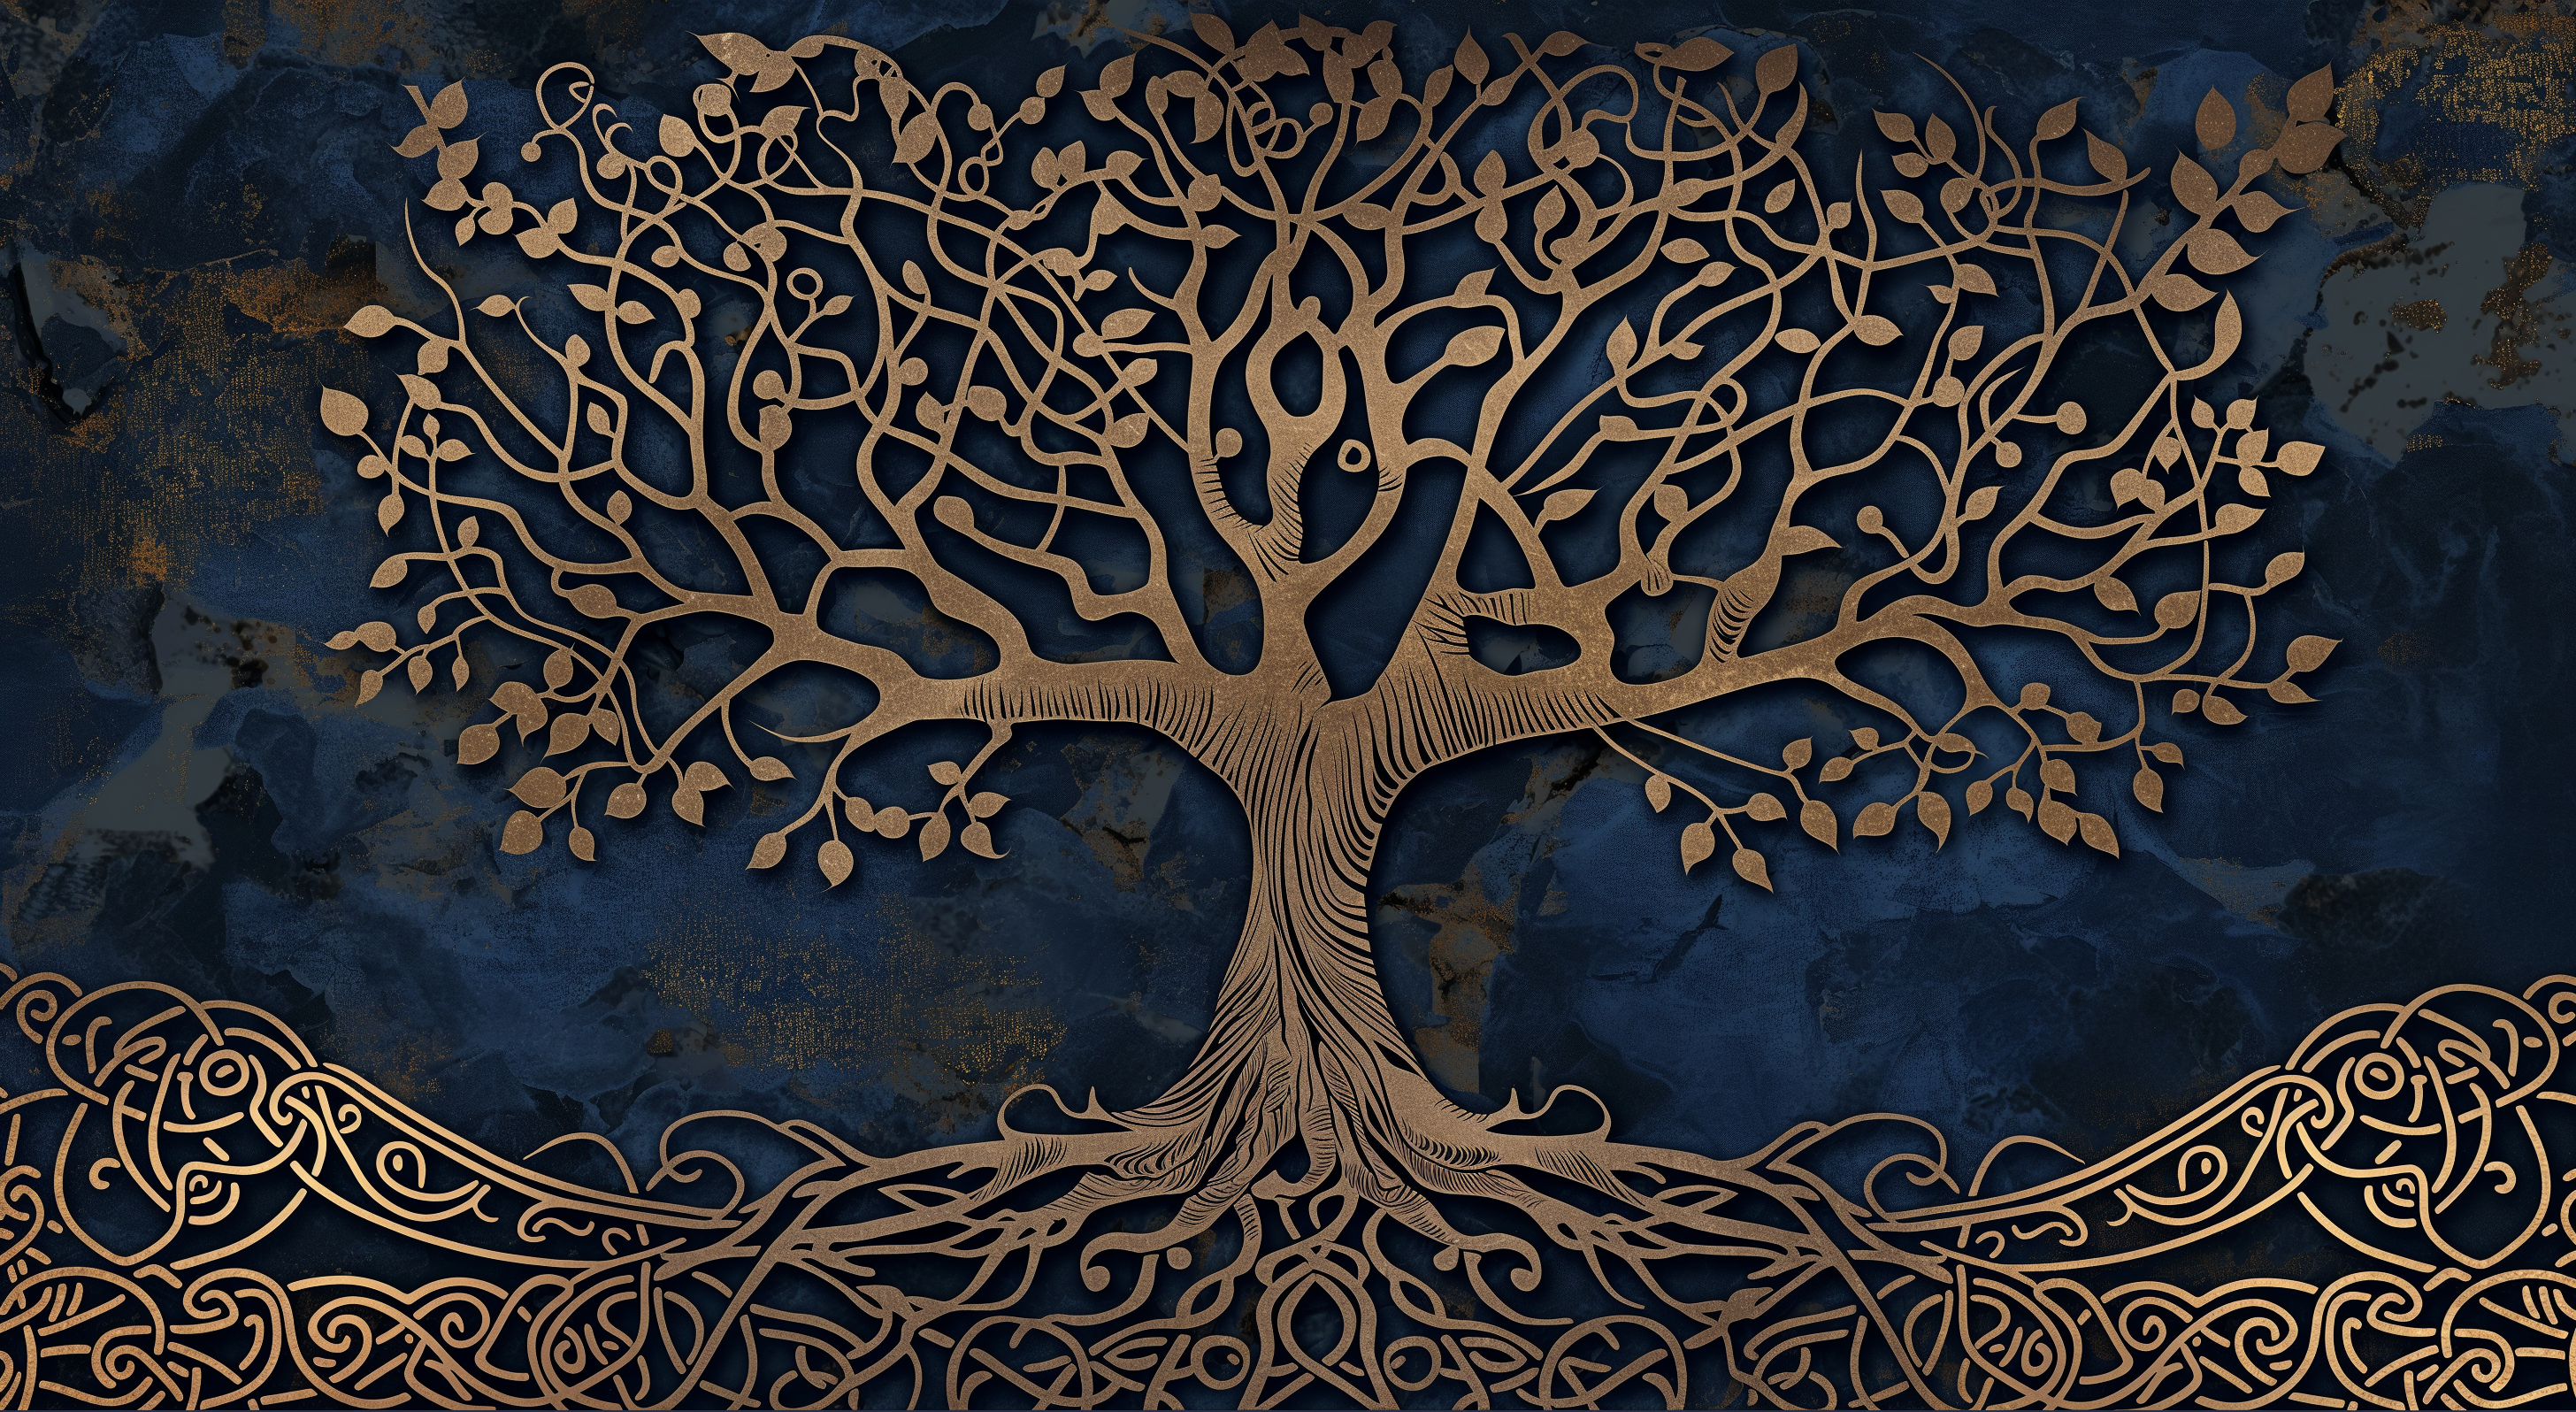 HD Yggdrasil tree wallpaper with artistic golden branches on a dark textured background for desktop.